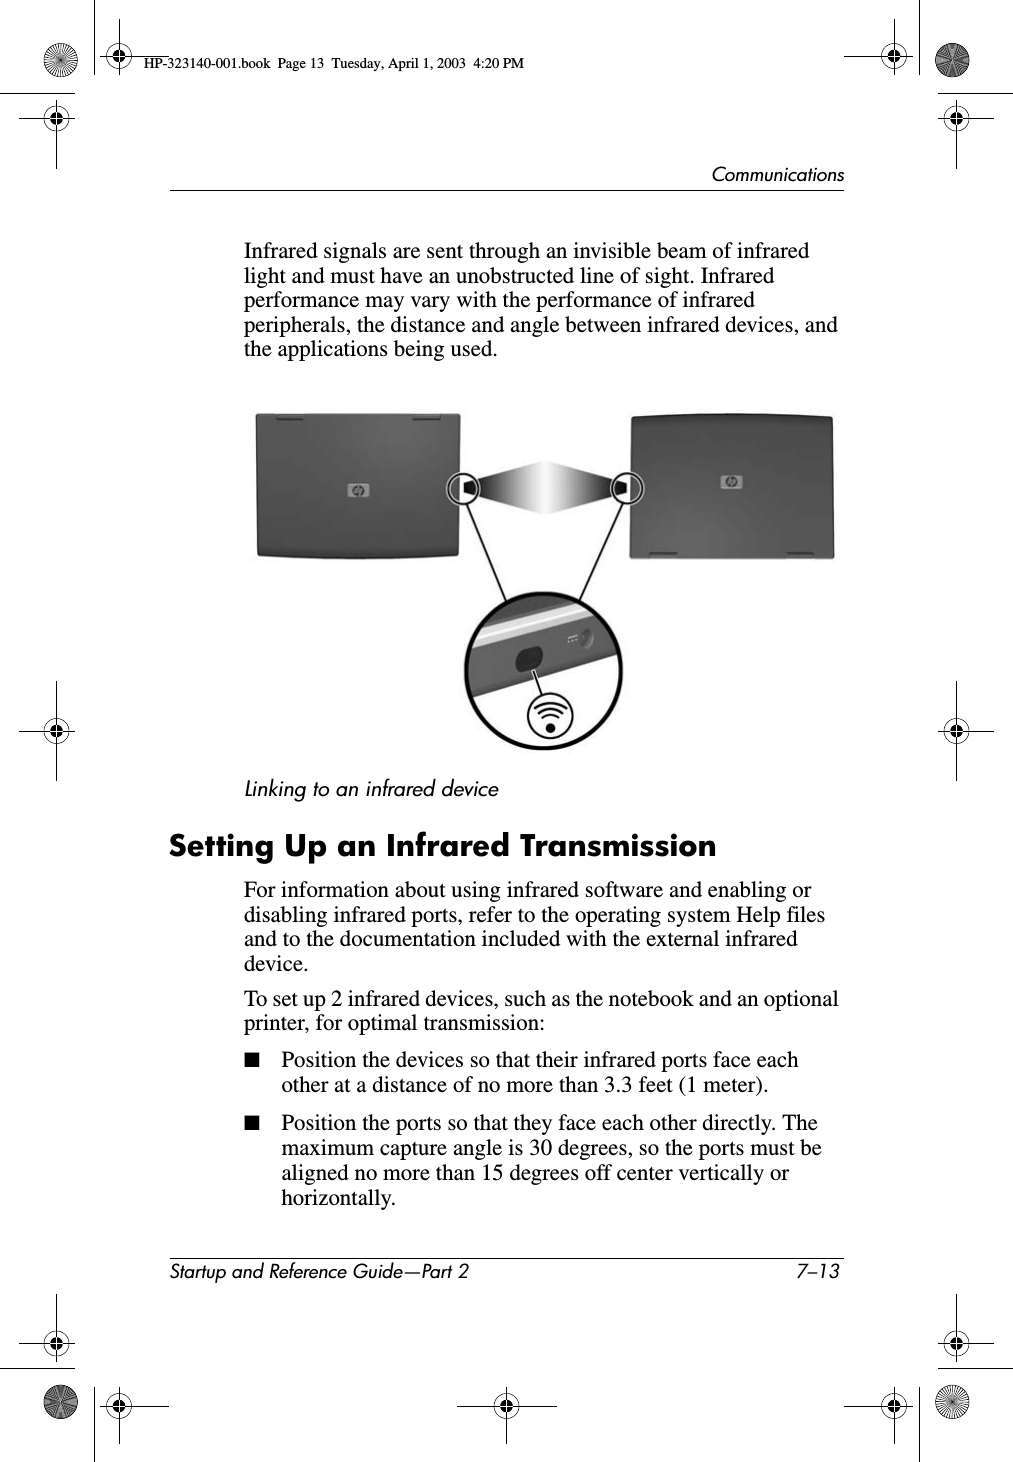 CommunicationsStartup and Reference Guide—Part 2 7–13Infrared signals are sent through an invisible beam of infrared light and must have an unobstructed line of sight. Infrared performance may vary with the performance of infrared peripherals, the distance and angle between infrared devices, and the applications being used.Linking to an infrared deviceSetting Up an Infrared TransmissionFor information about using infrared software and enabling or disabling infrared ports, refer to the operating system Help files and to the documentation included with the external infrared device.To set up 2 infrared devices, such as the notebook and an optional printer, for optimal transmission:■Position the devices so that their infrared ports face each other at a distance of no more than 3.3 feet (1 meter).■Position the ports so that they face each other directly. The maximum capture angle is 30 degrees, so the ports must be aligned no more than 15 degrees off center vertically or horizontally.HP-323140-001.book  Page 13  Tuesday, April 1, 2003  4:20 PM